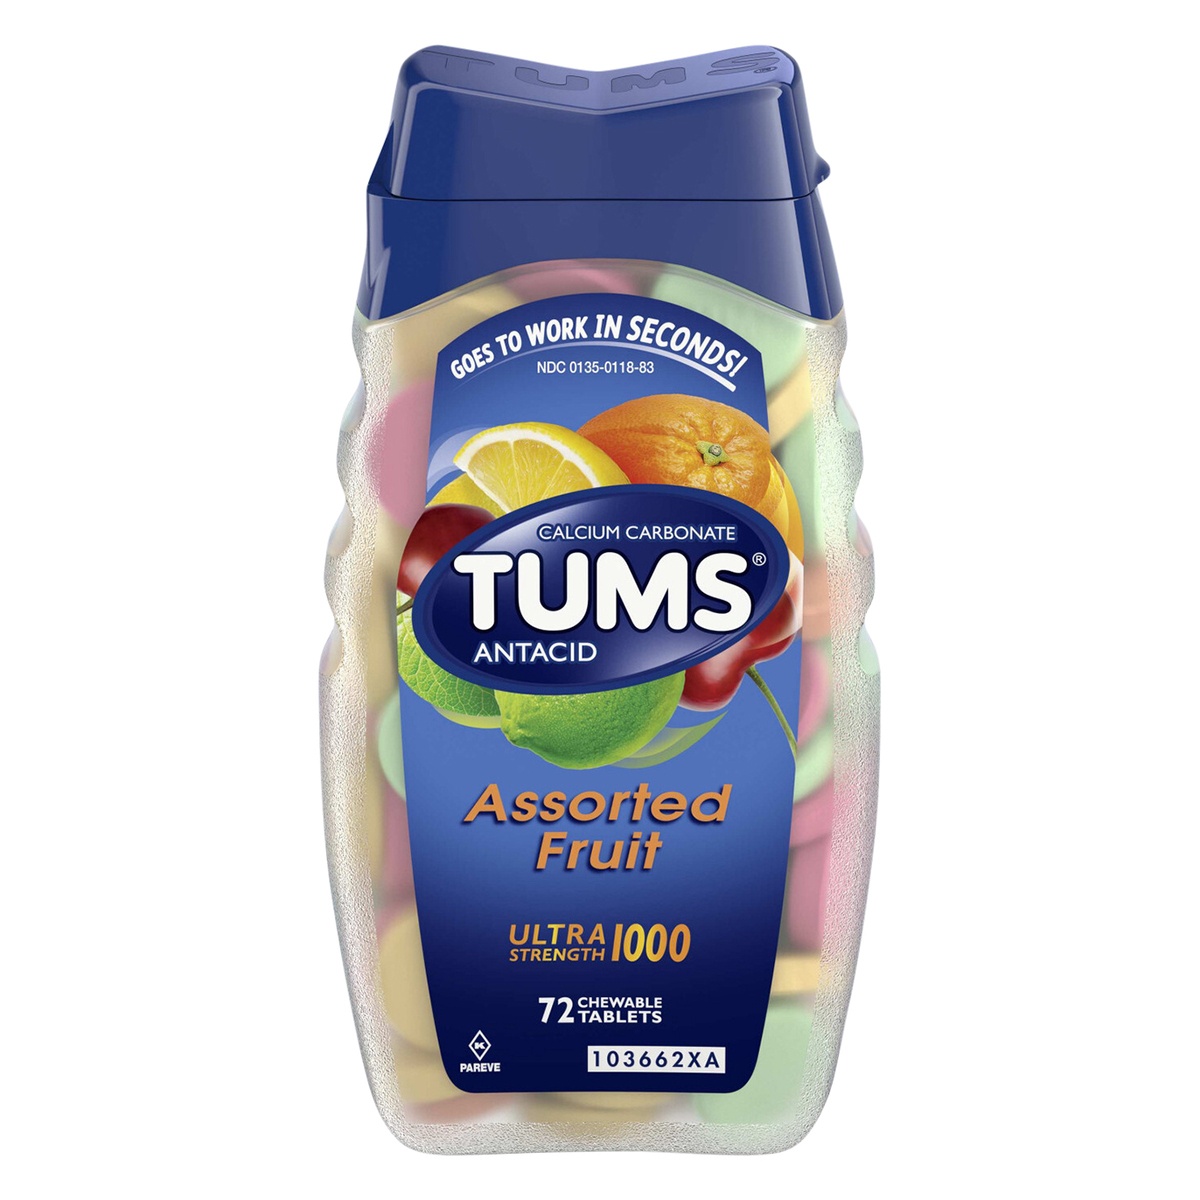 slide 1 of 4, TUMS Ultra Strength Chewable Antacid Tablets for Heartburn Relief, Assorted Fruit - 72 Count, 72 ct